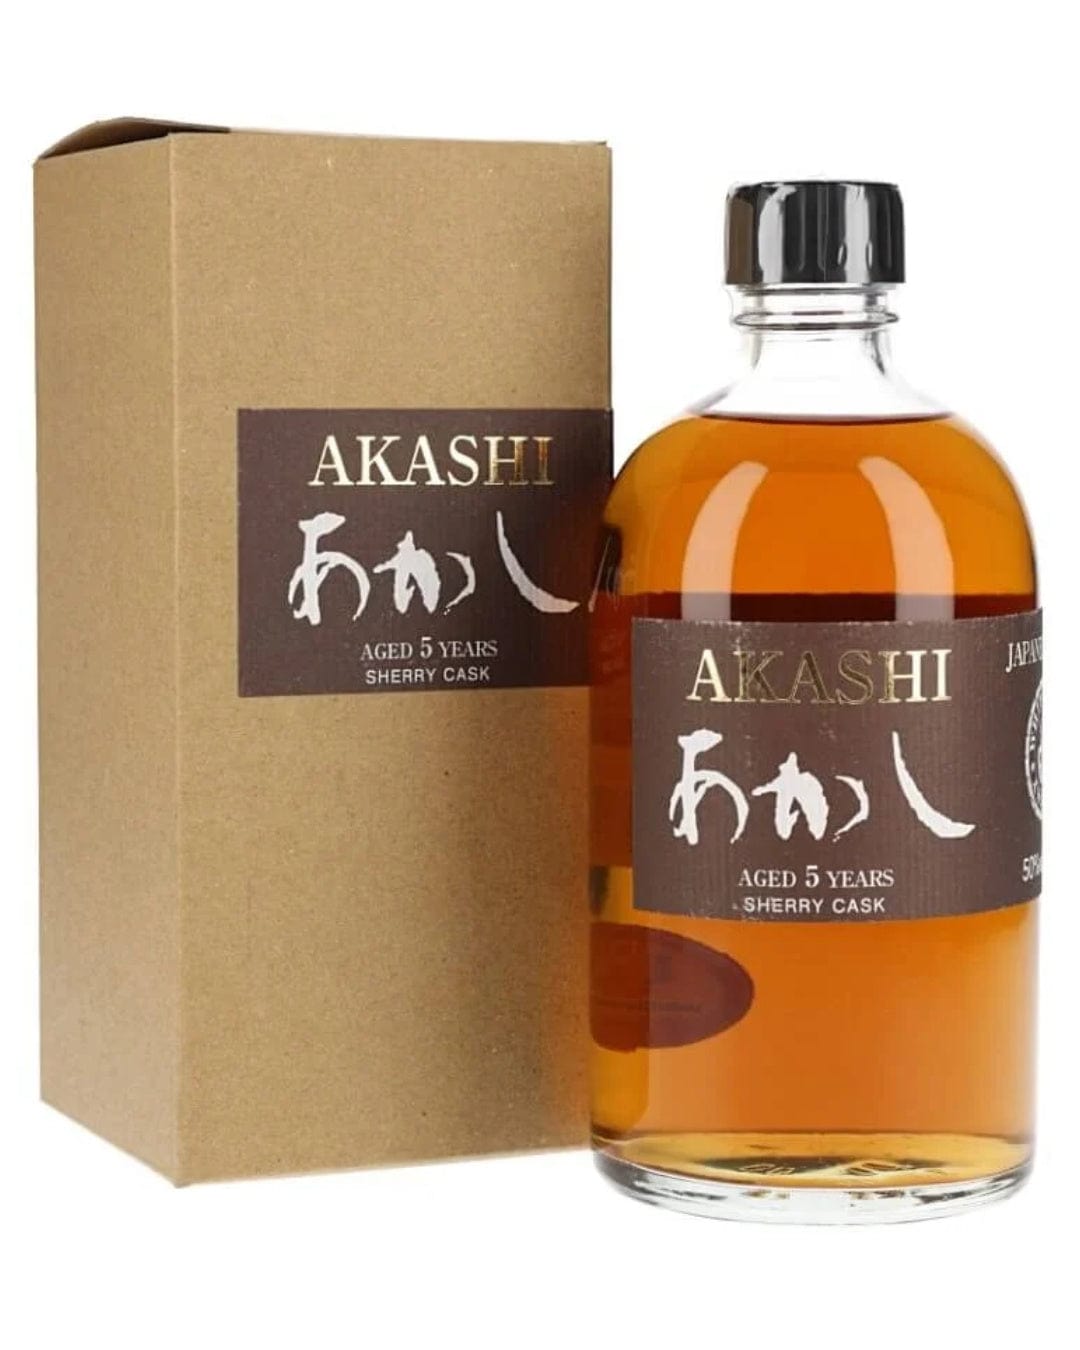 Akashi 5 Years Old Sherry Cask Japanese Whisky, 50 cl